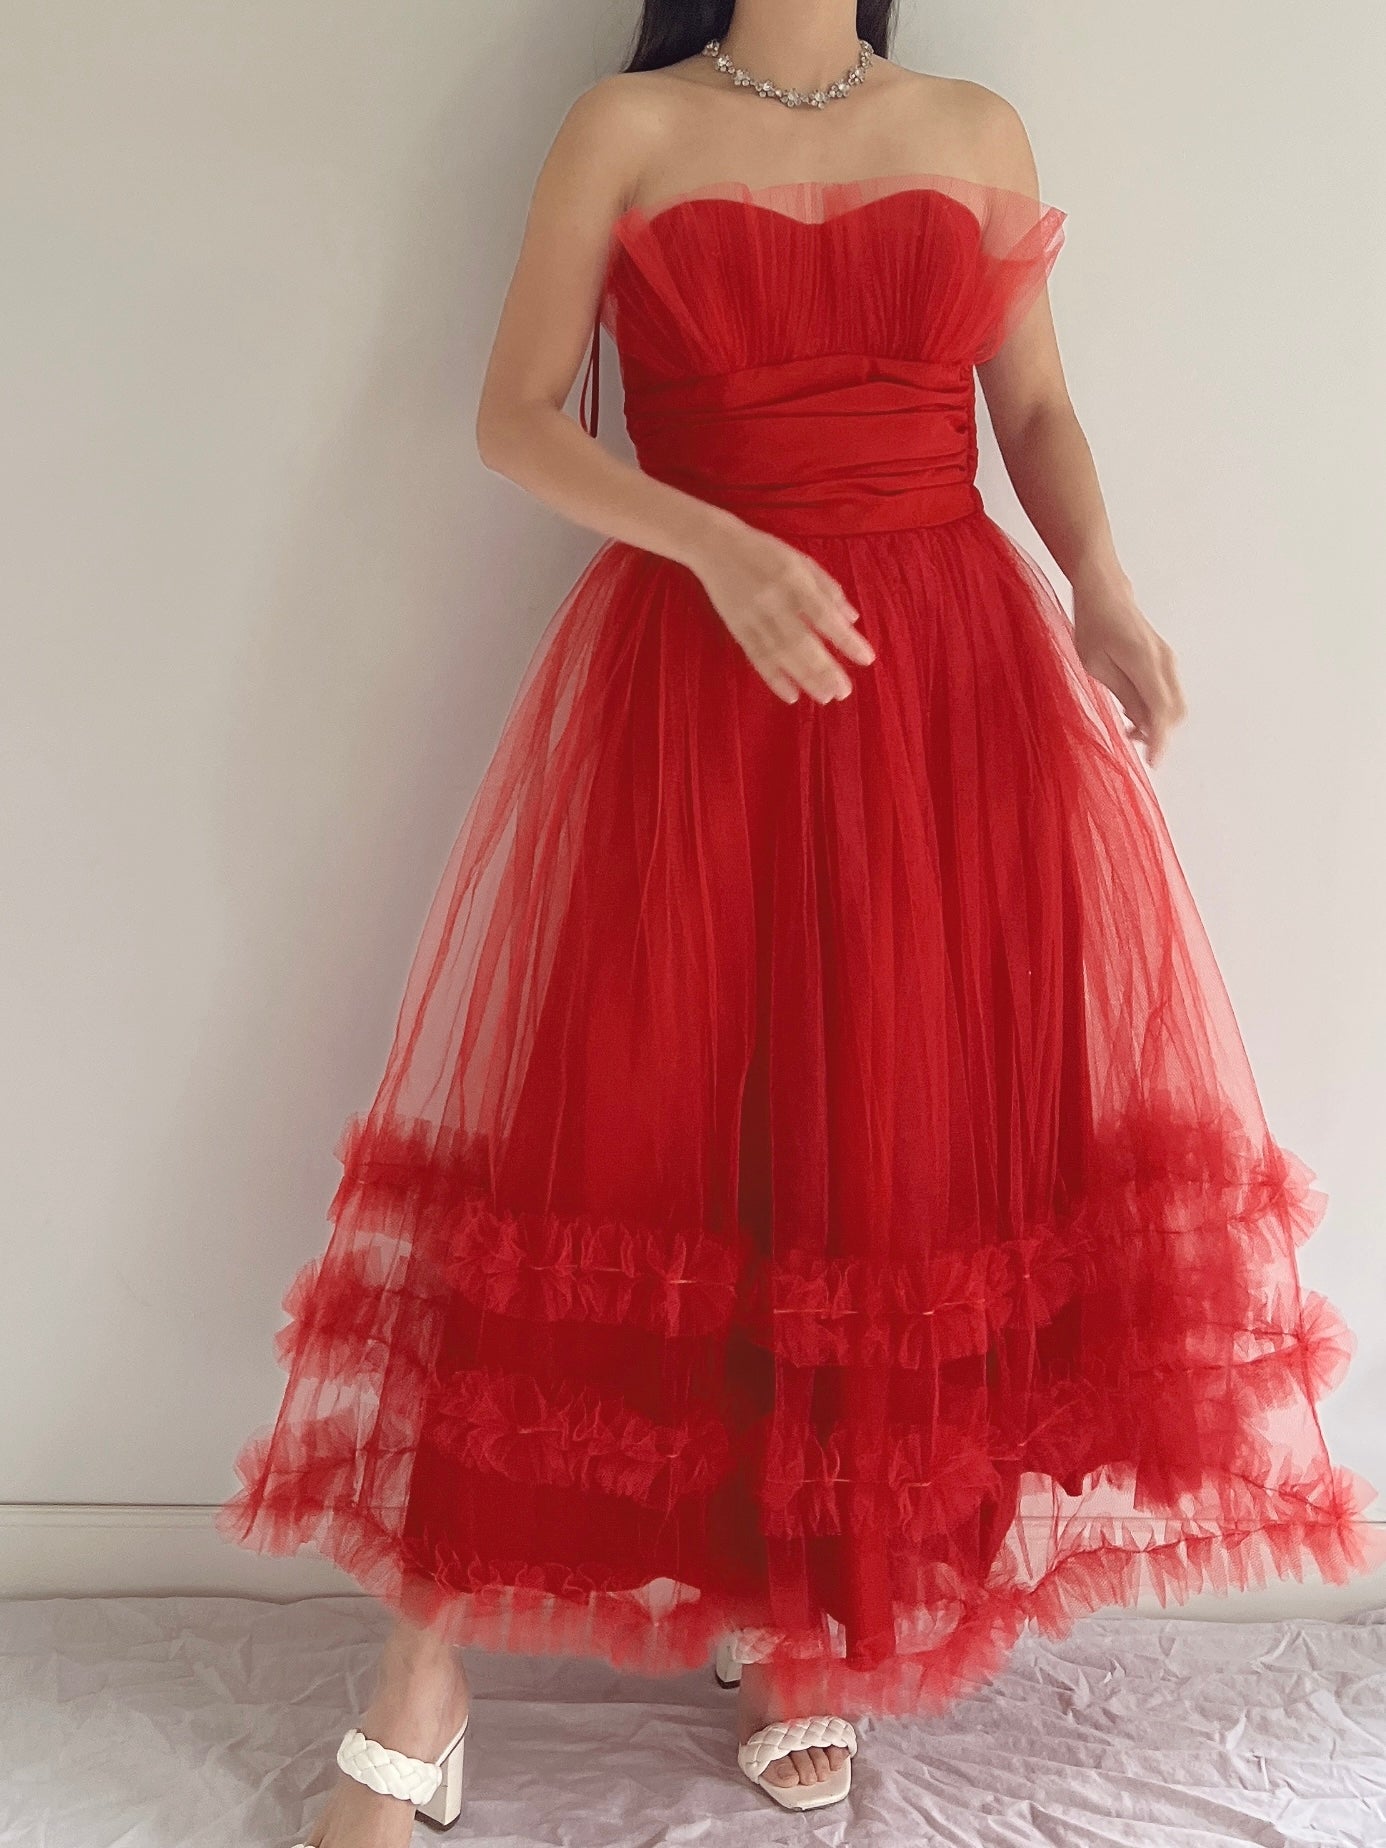 1950s Red Tulle Dress - XS